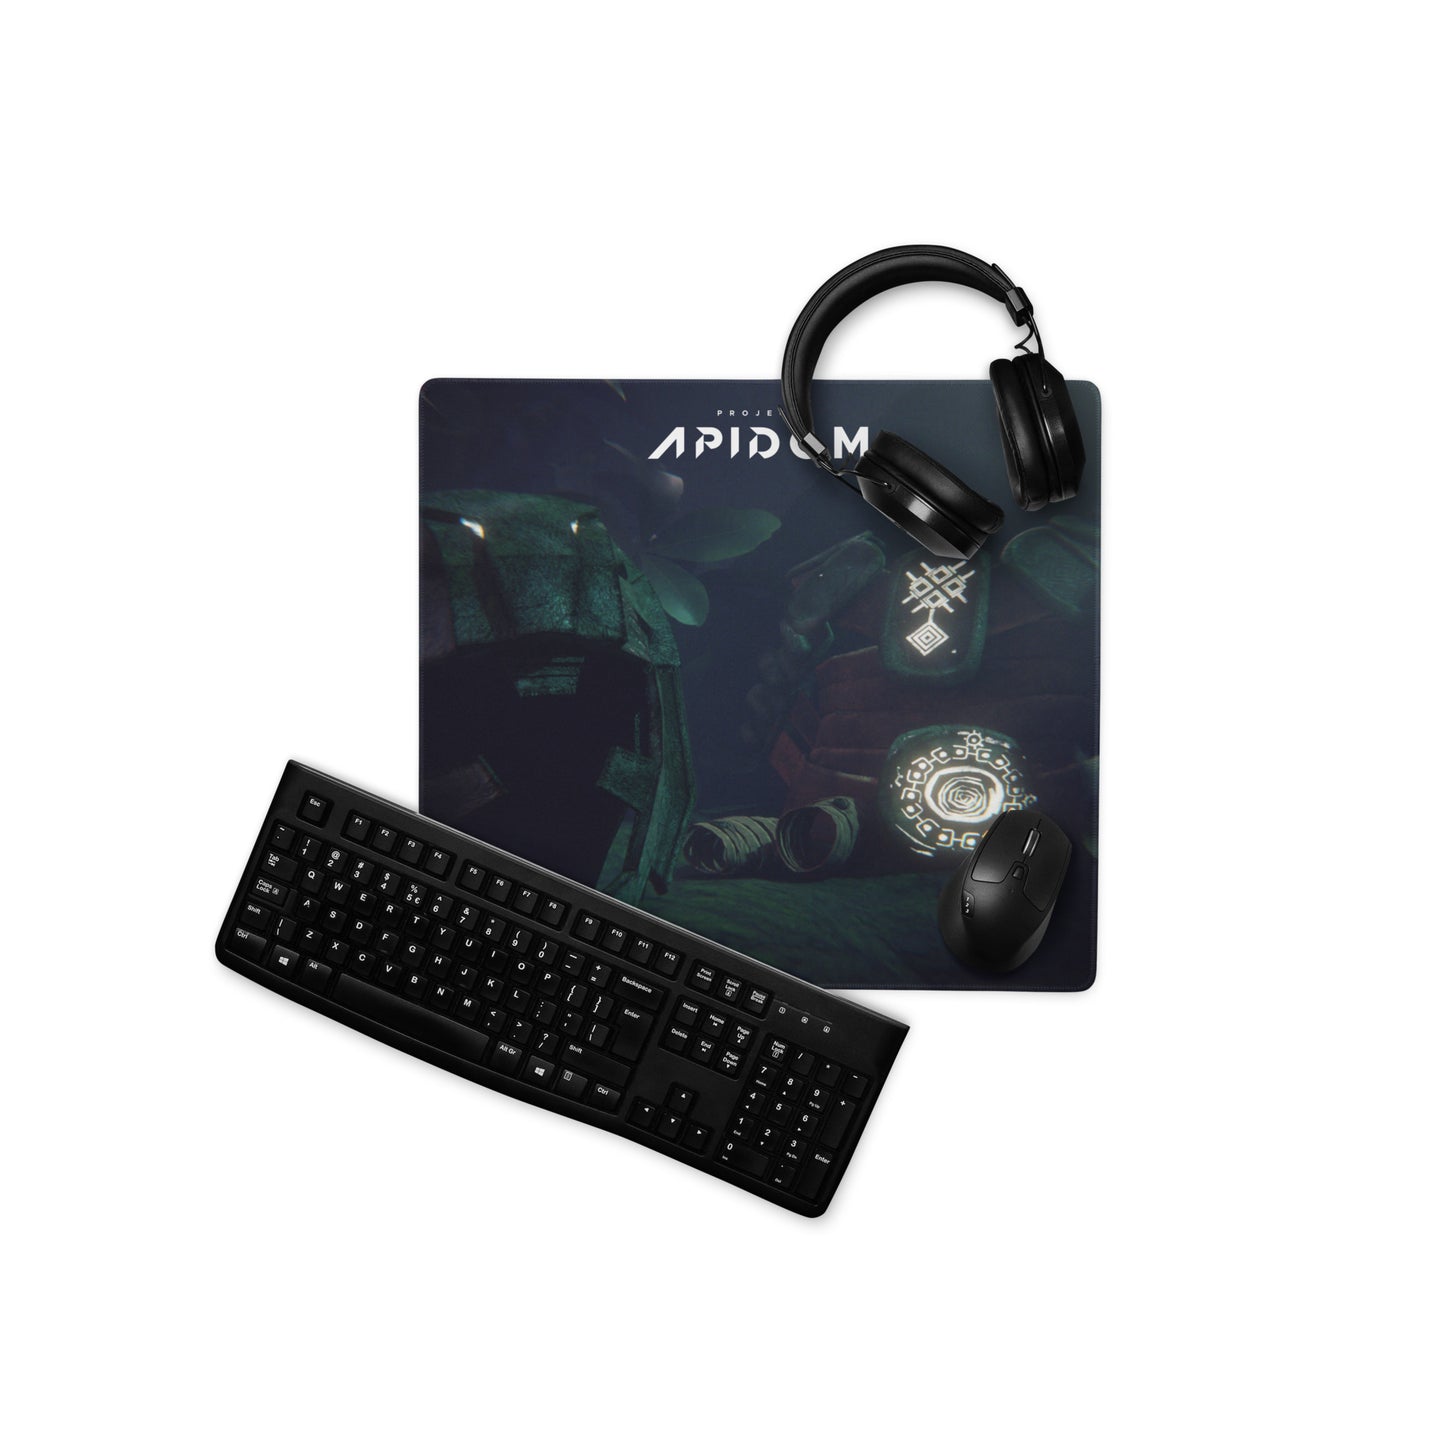 Project_Apidom_#2 - Gaming mouse pad